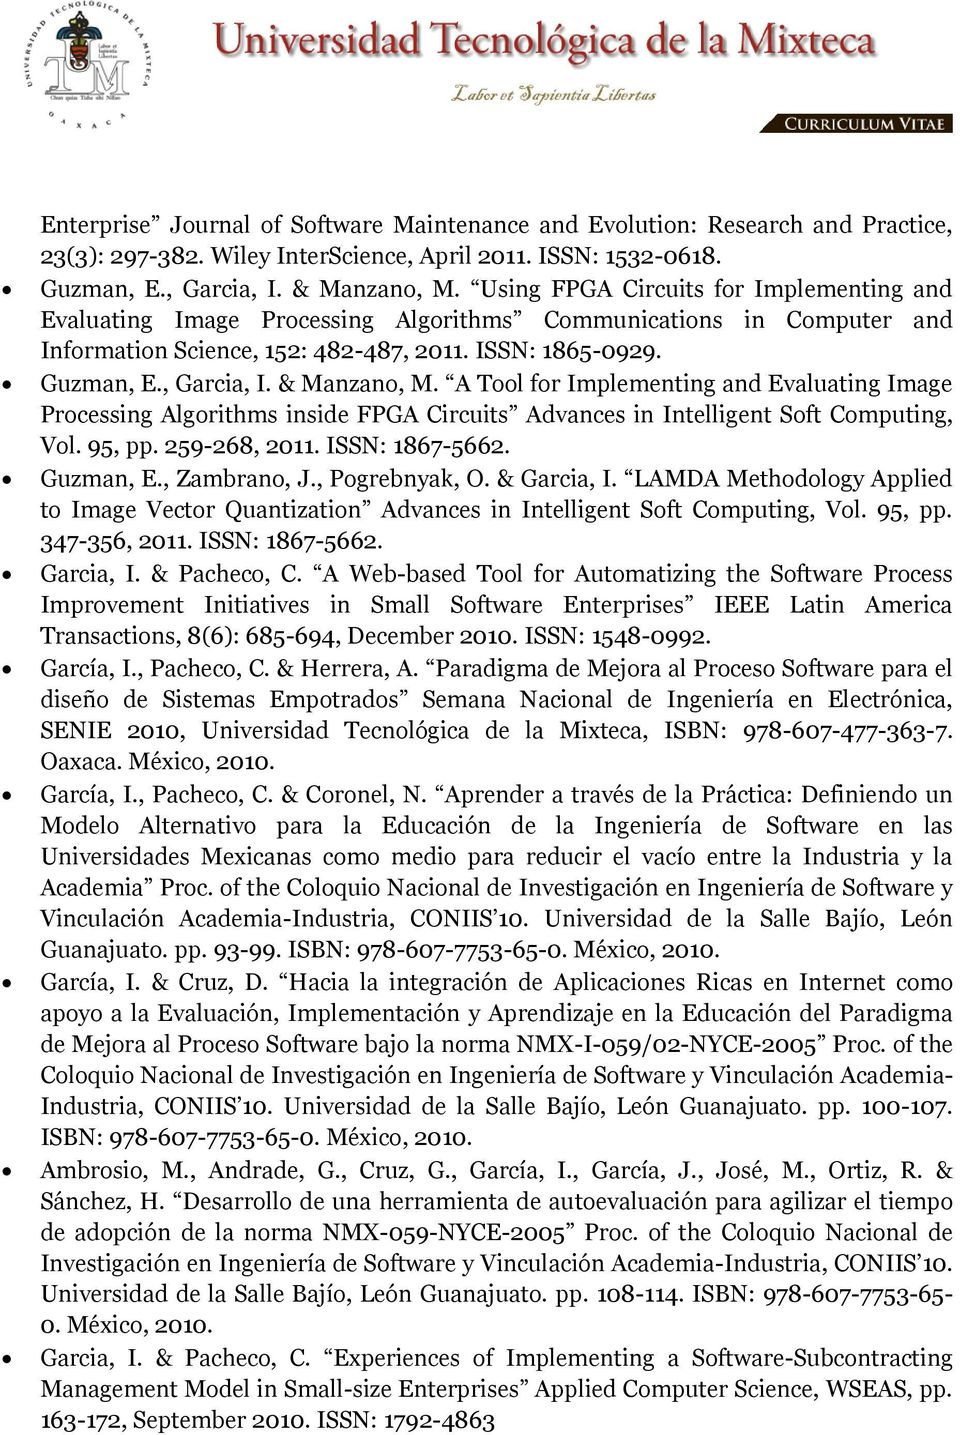 & Manzano, M. A Tool for Implementing and Evaluating Image Processing Algorithms inside FPGA Circuits Advances in Intelligent Soft Computing, Vol. 95, pp. 259-268, 2011. ISSN: 1867-5662. Guzman, E.